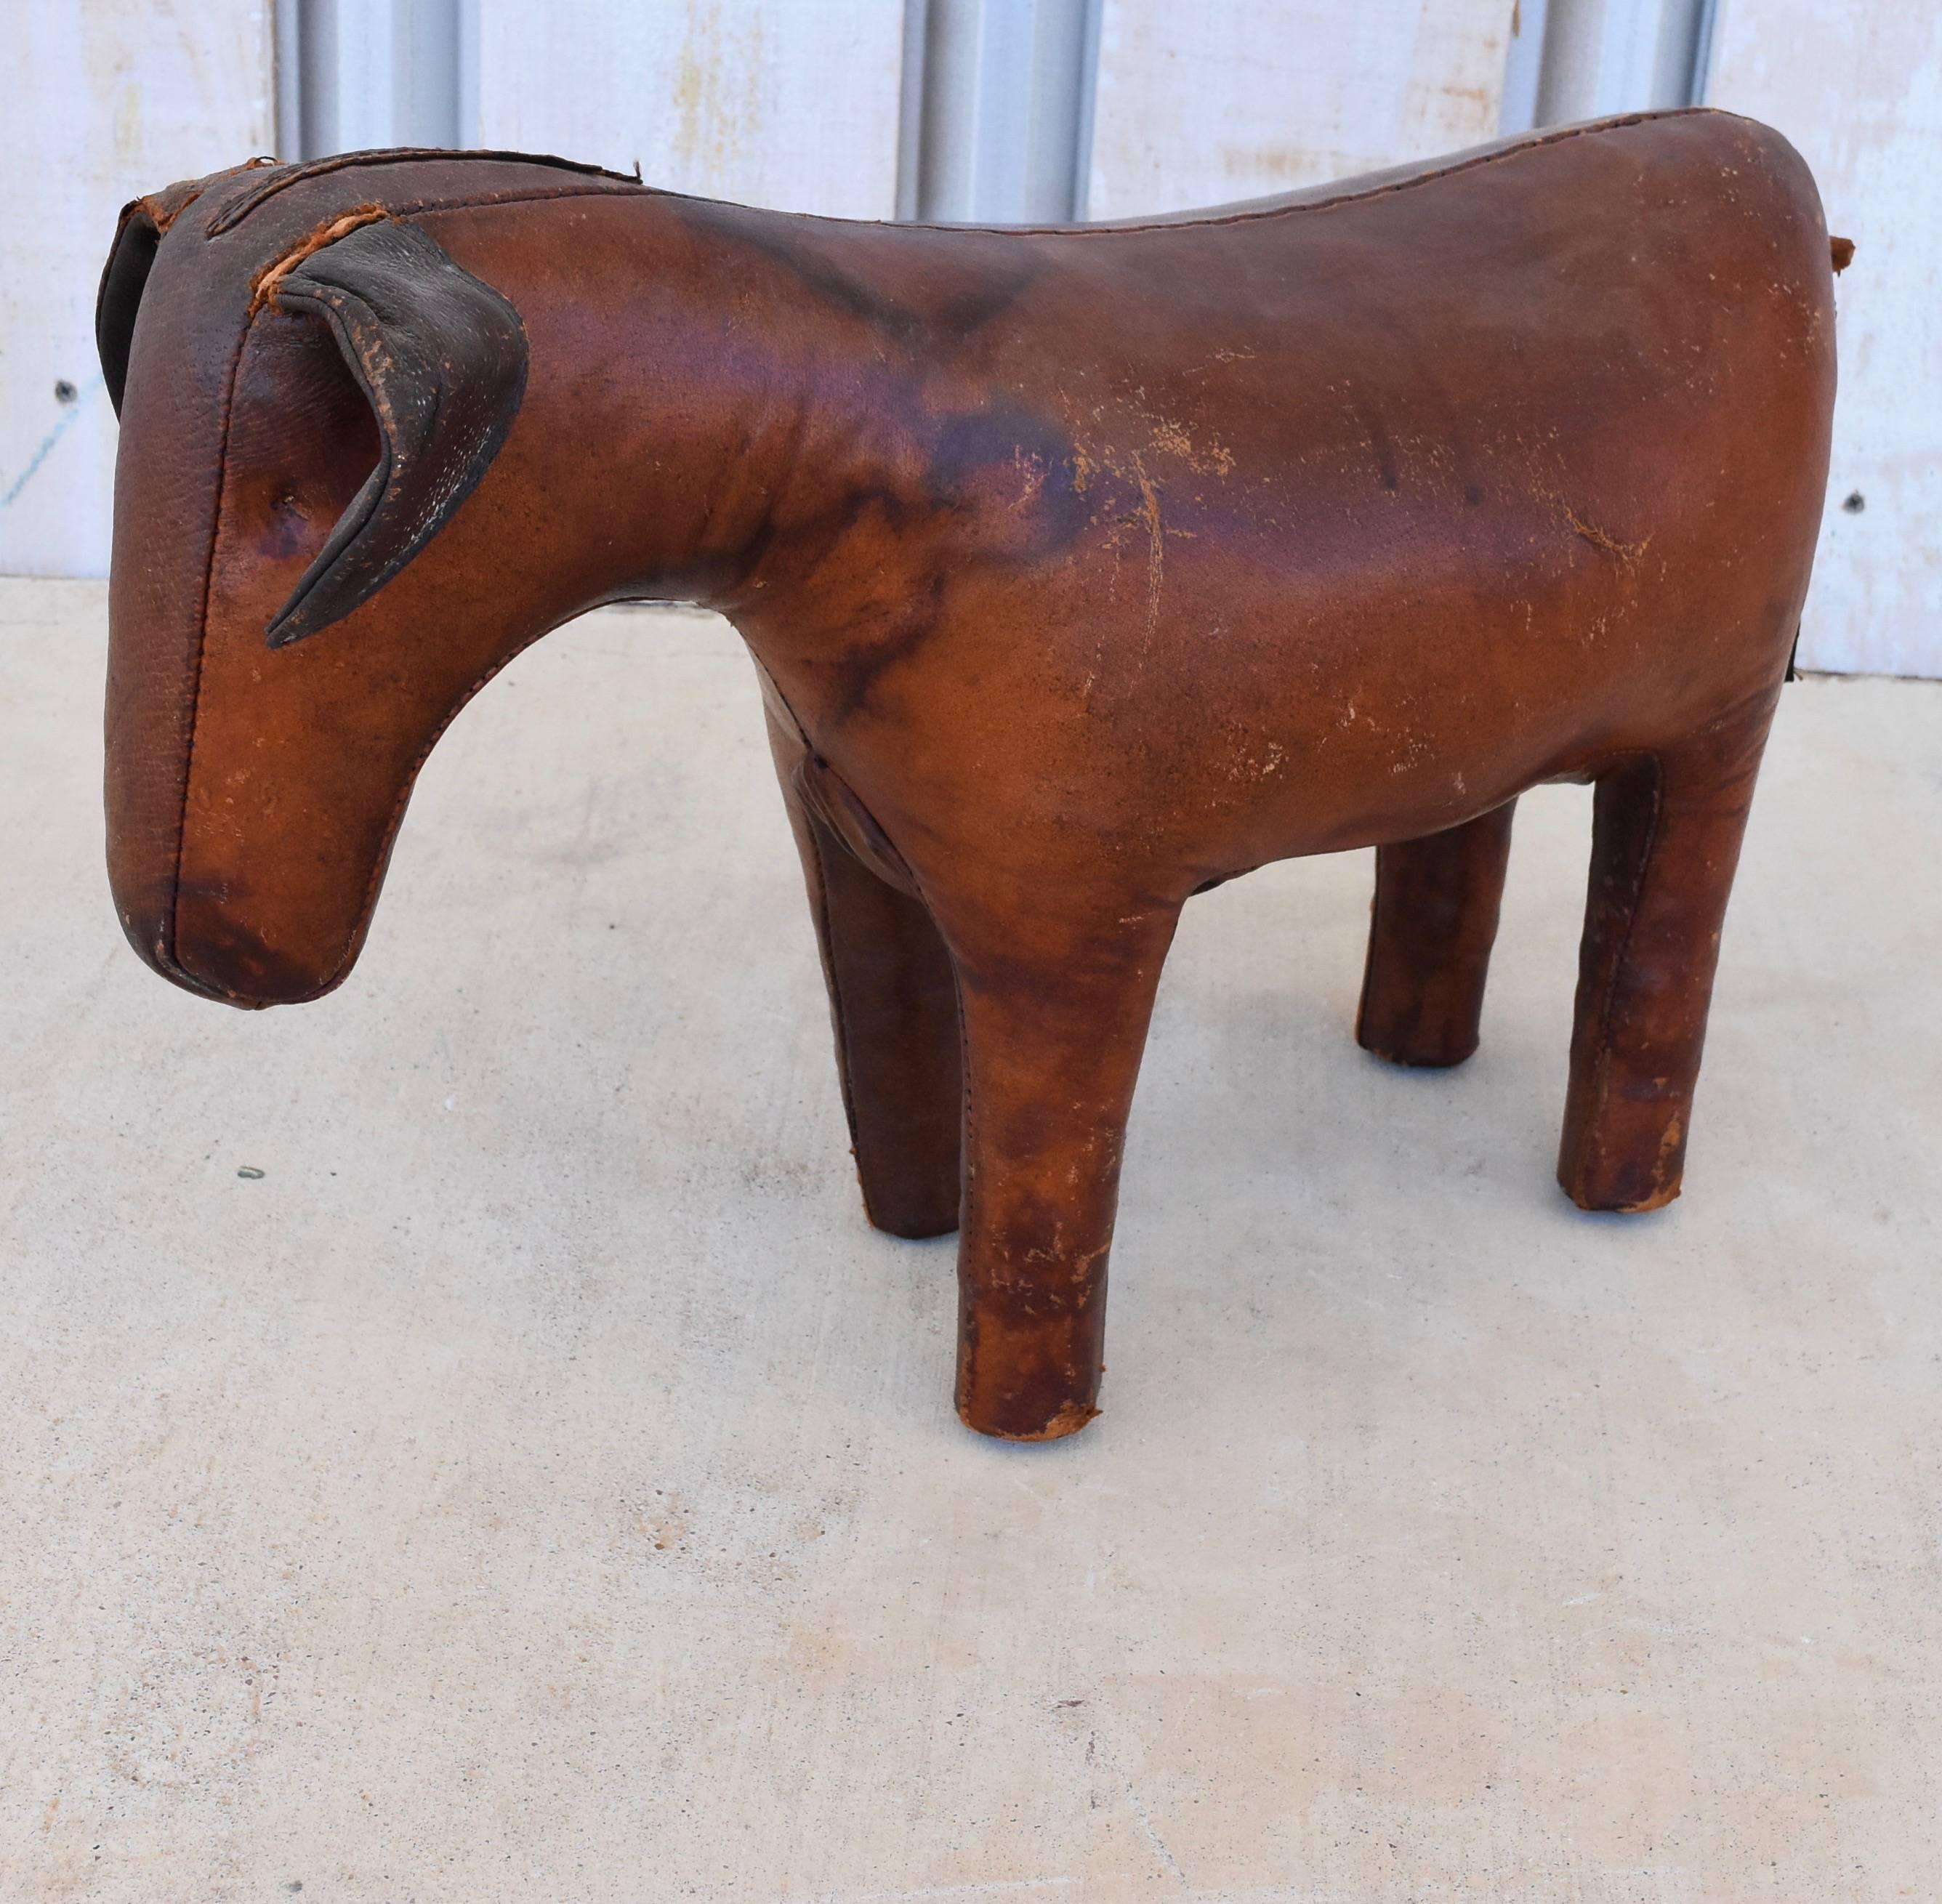 This leather donkey footstool is one of several animals produced by the Omersa Co. in England. It is worn with slight scuffs and some stain on the left shoulder. Its tail is intact but very fragile. His main on the top of his head is no longer there